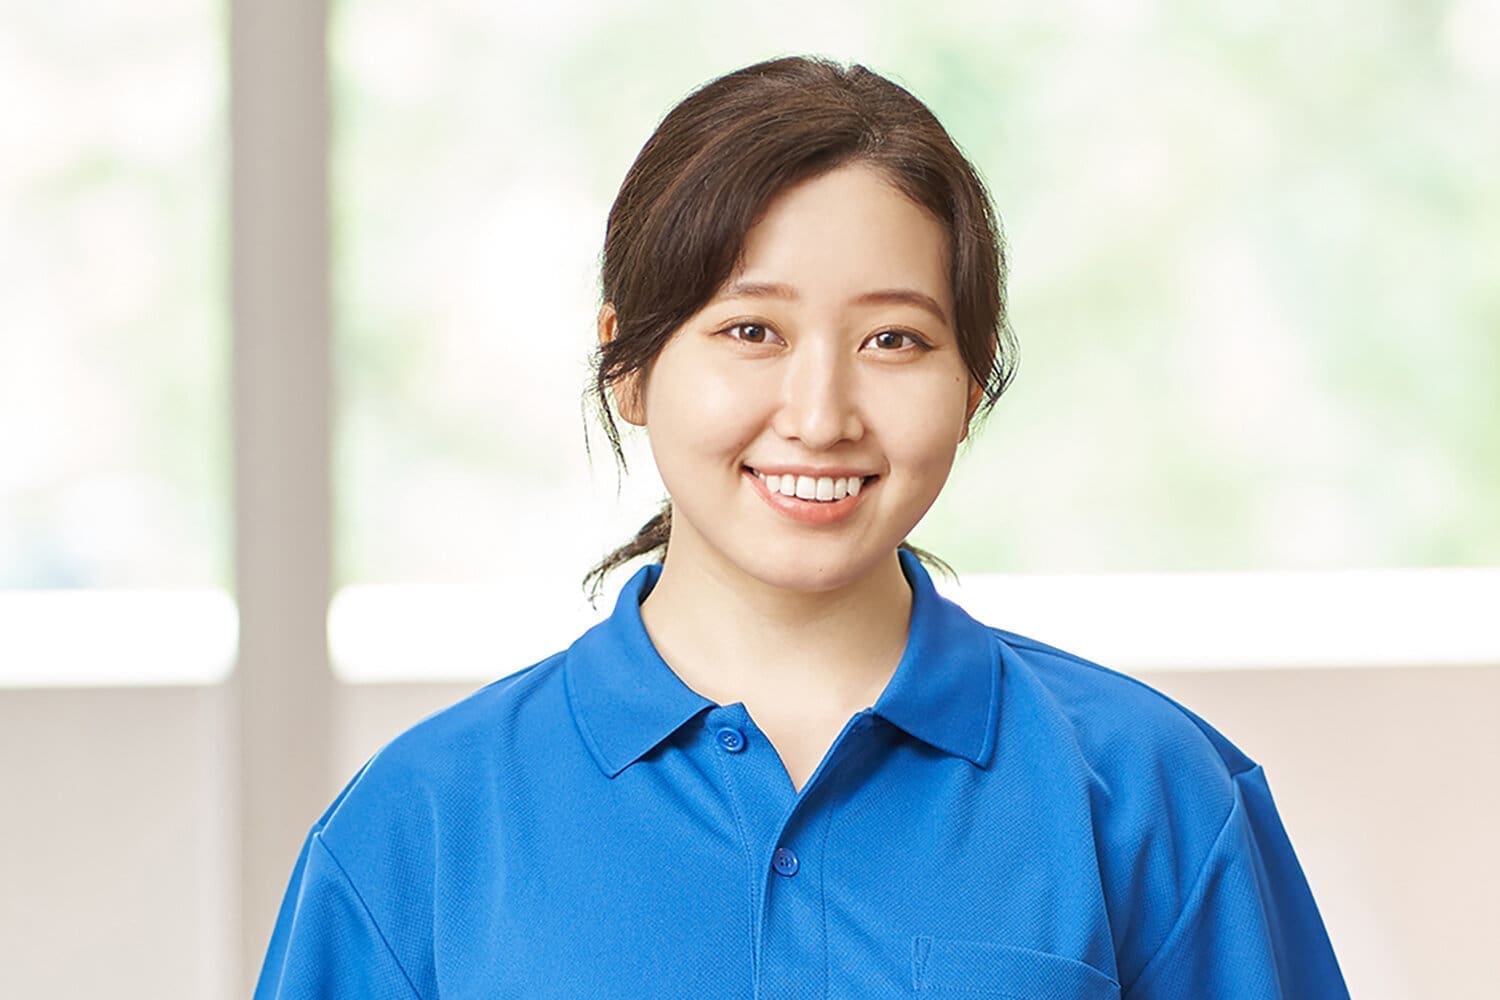 Young female Asian care assistant with dark, tied back hair and wearing a royal blue polo shirt